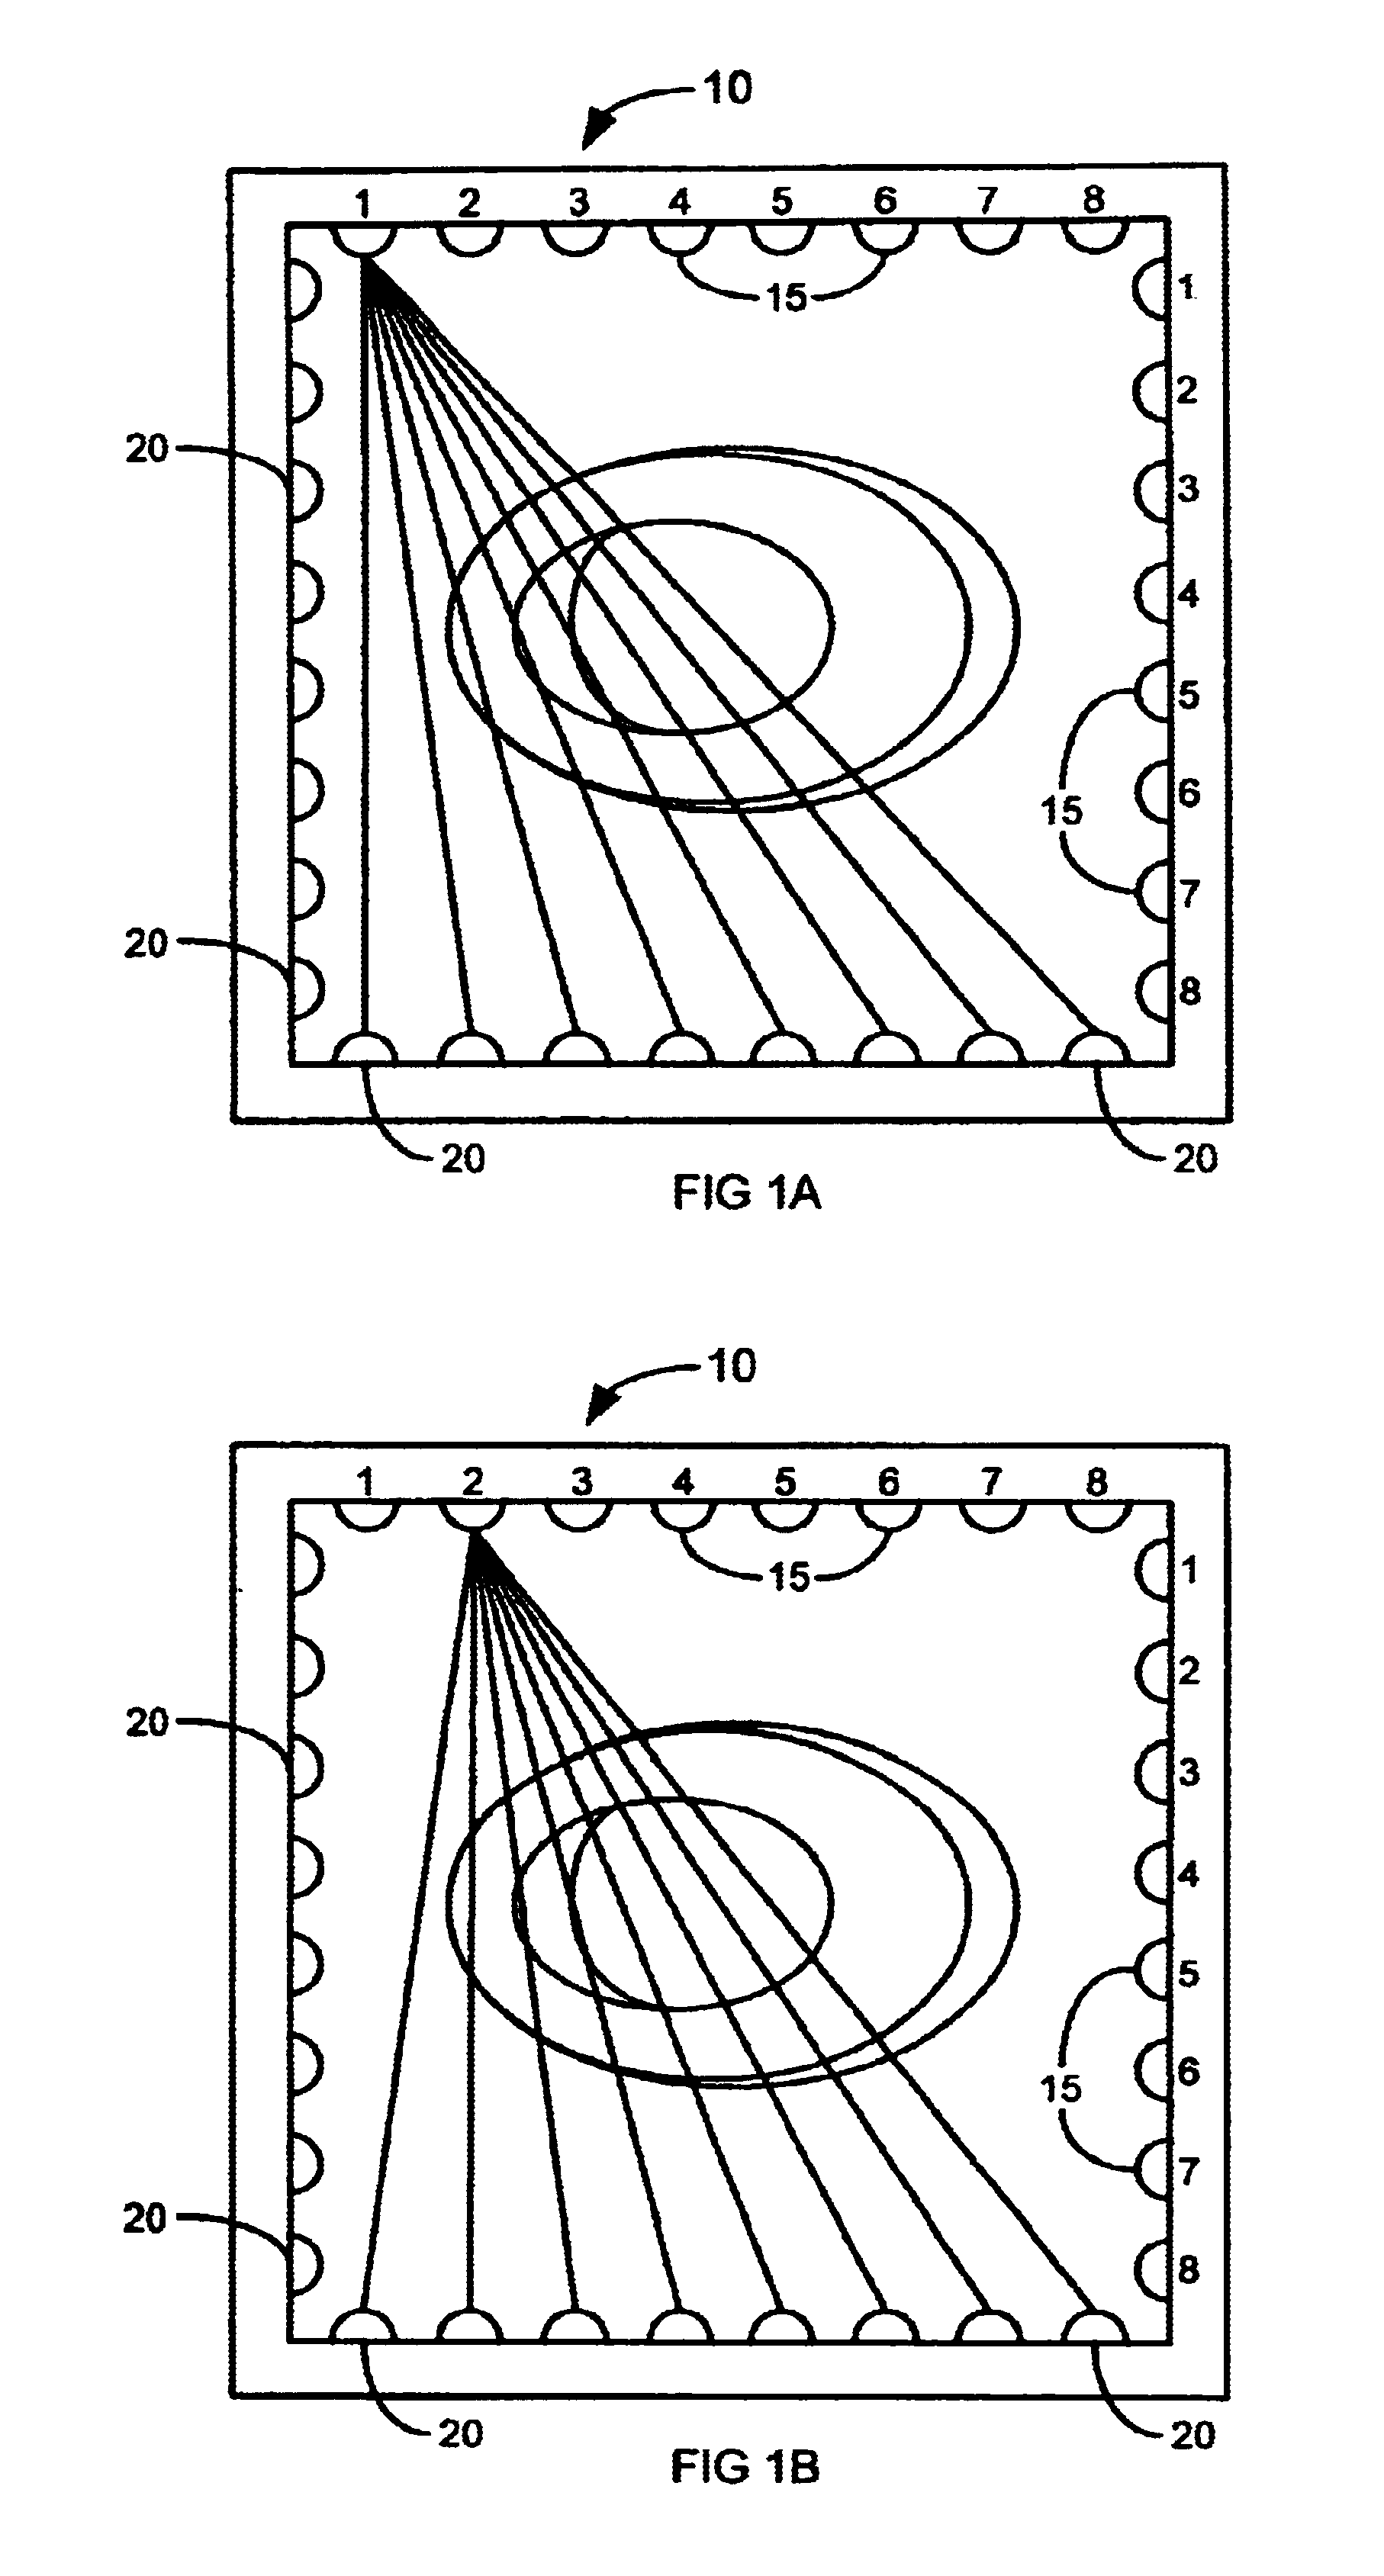 Ultra-wideband imaging system